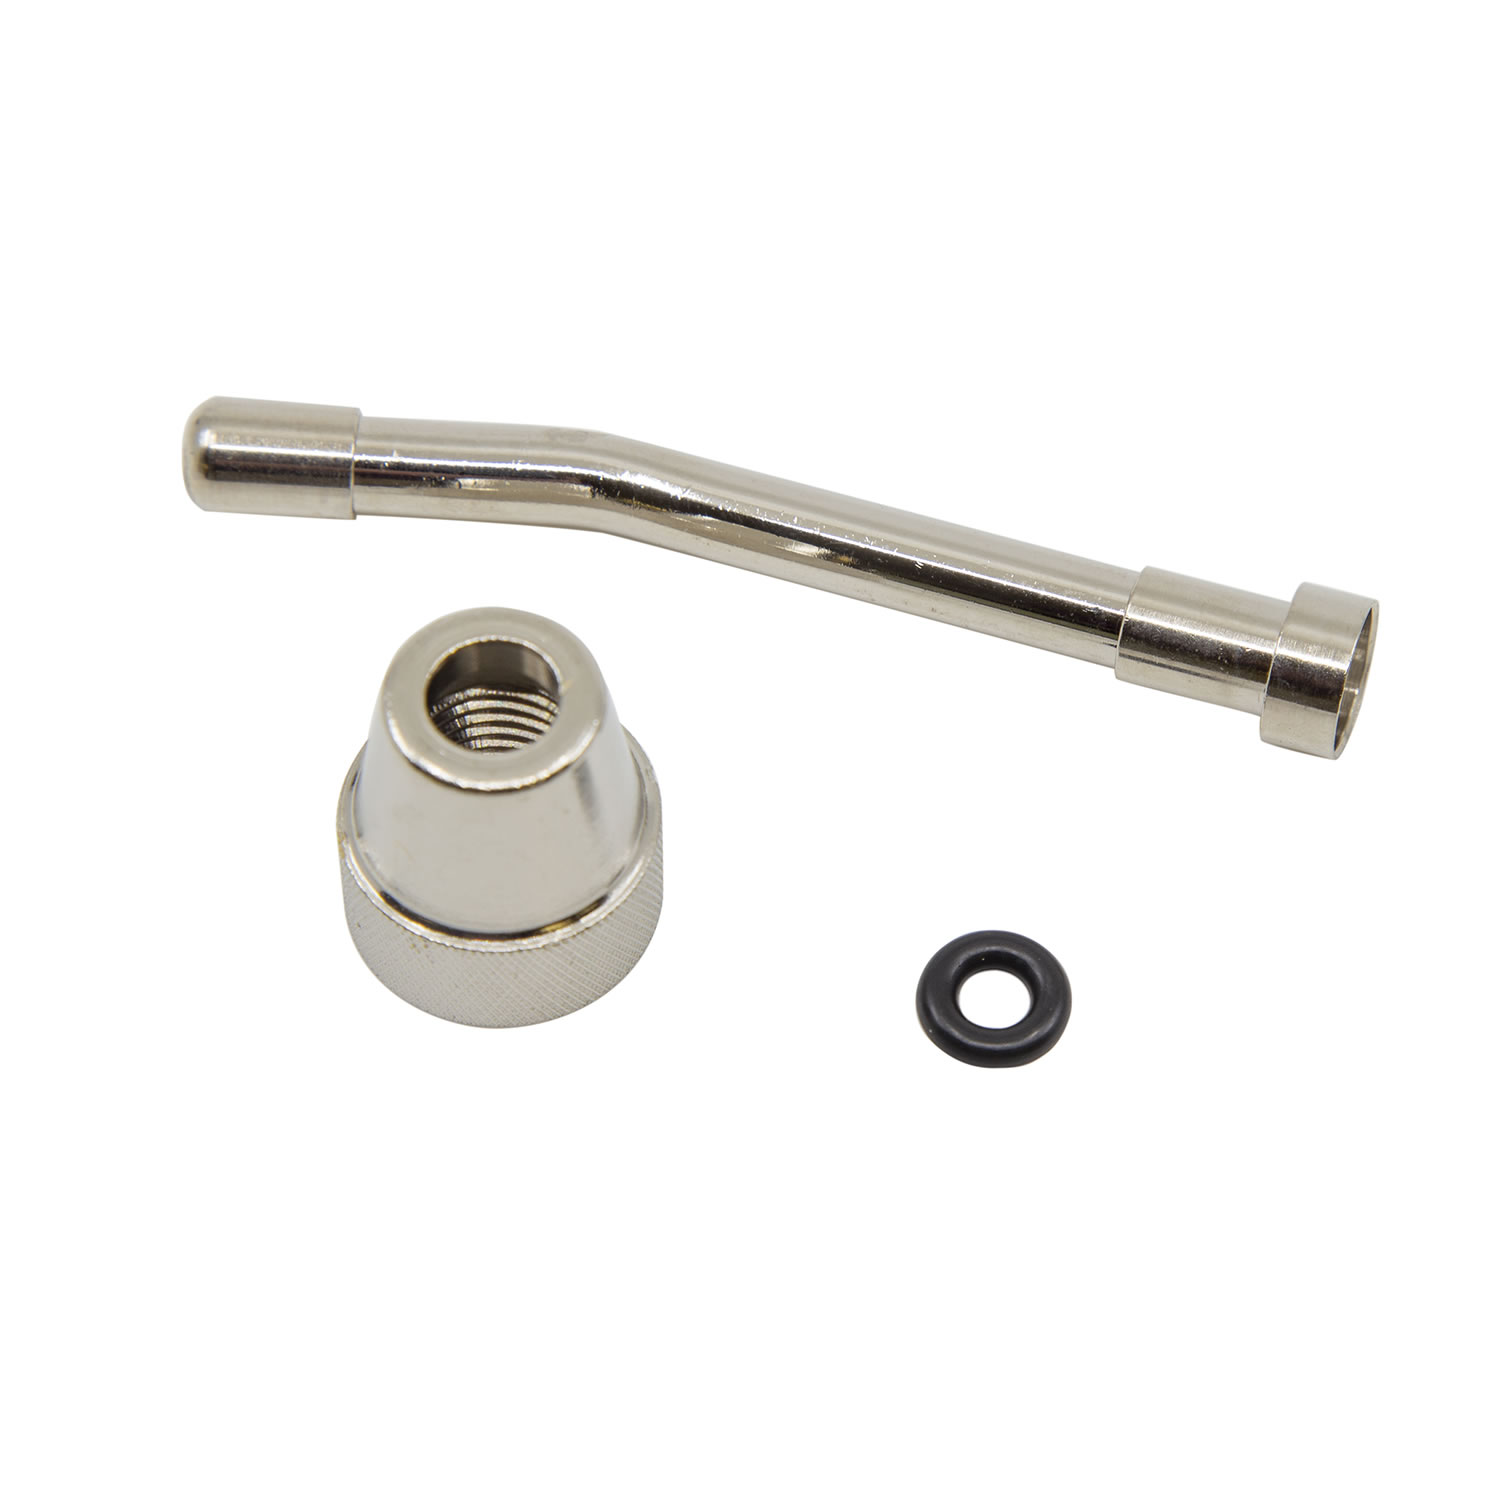 NEOGEN DRENCH NOZZLE WITH METAL NUT FOR VACC/BMV